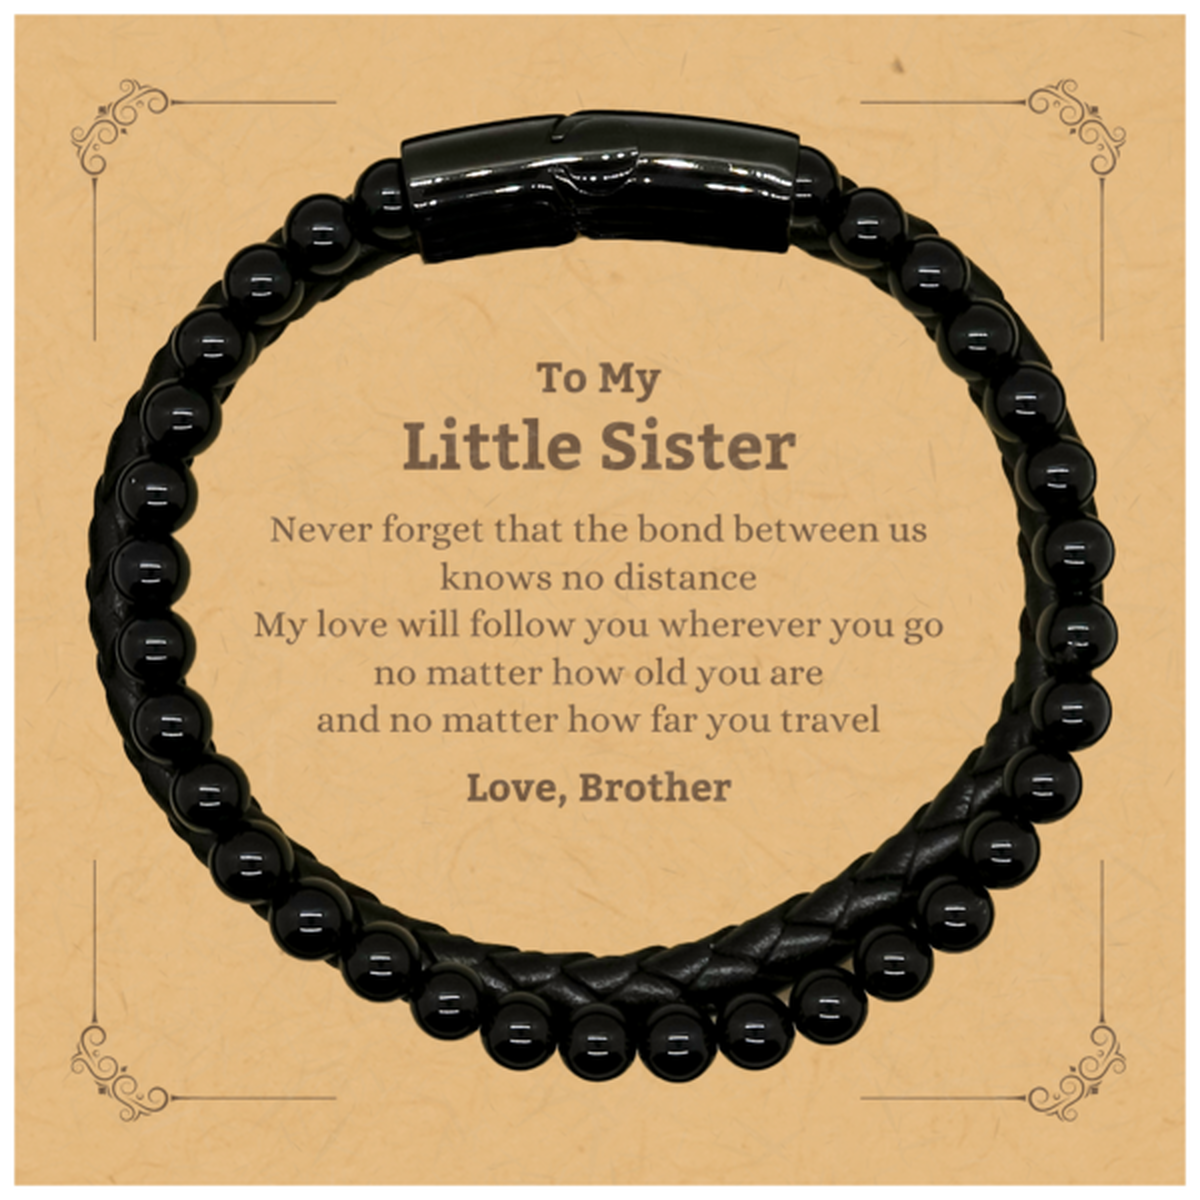 Little Sister Birthday Gifts from Brother, Adjustable Stone Leather Bracelets for Little Sister Christmas Graduation Unique Gifts Little Sister Never forget that the bond between us knows no distance. Love, Brother